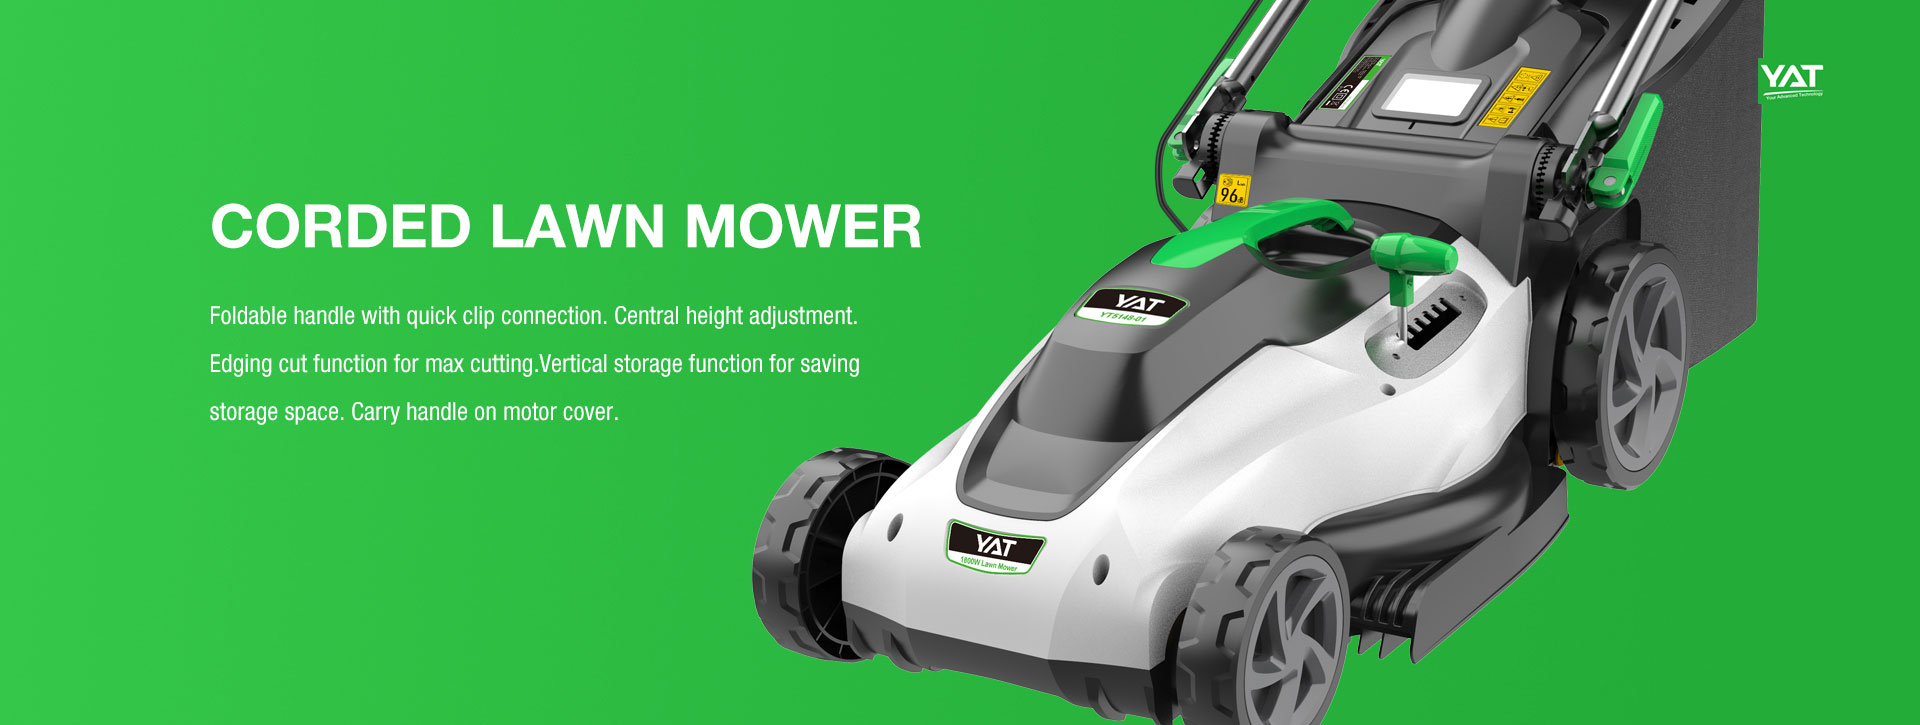 CORDED LAWN MOWER